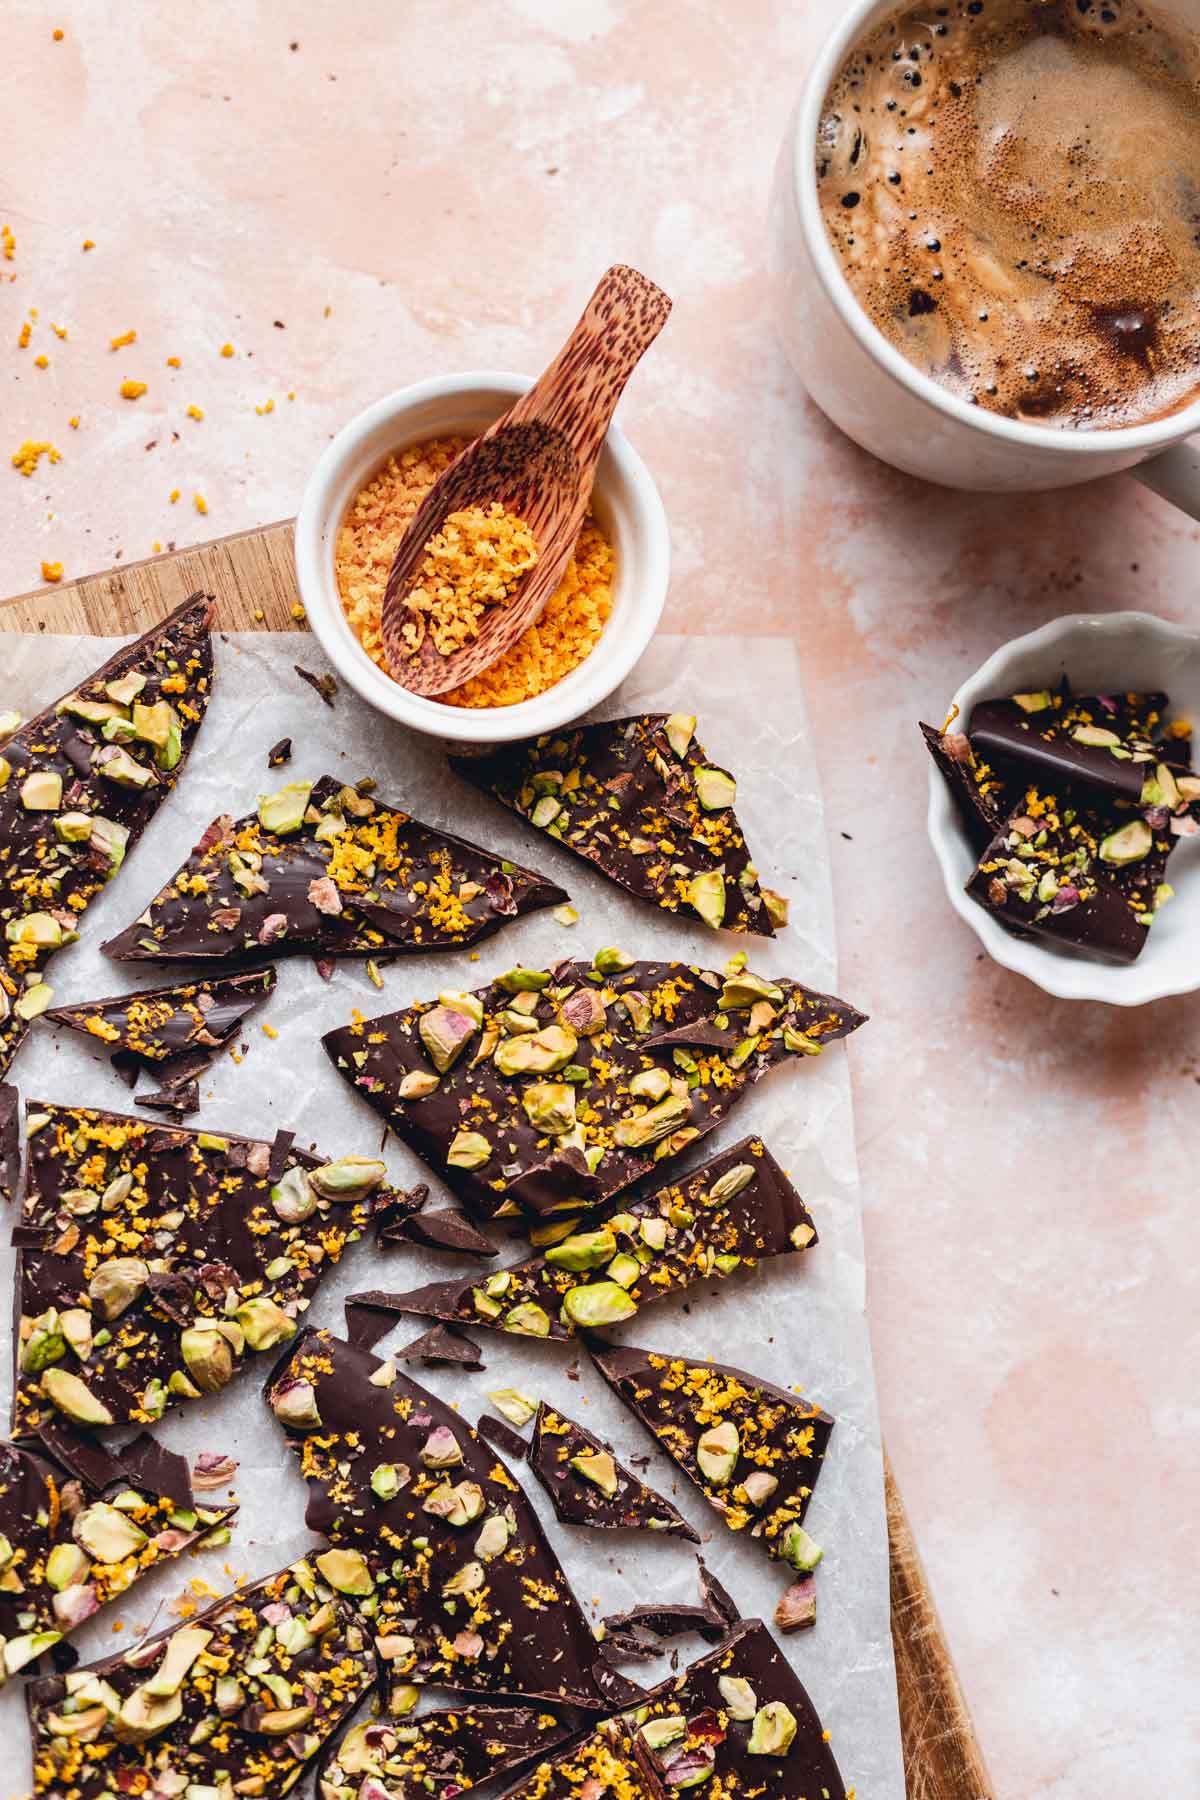 Pieces of CBD chocolate bark on white baking paper with coffee and orange zest placed next to it.